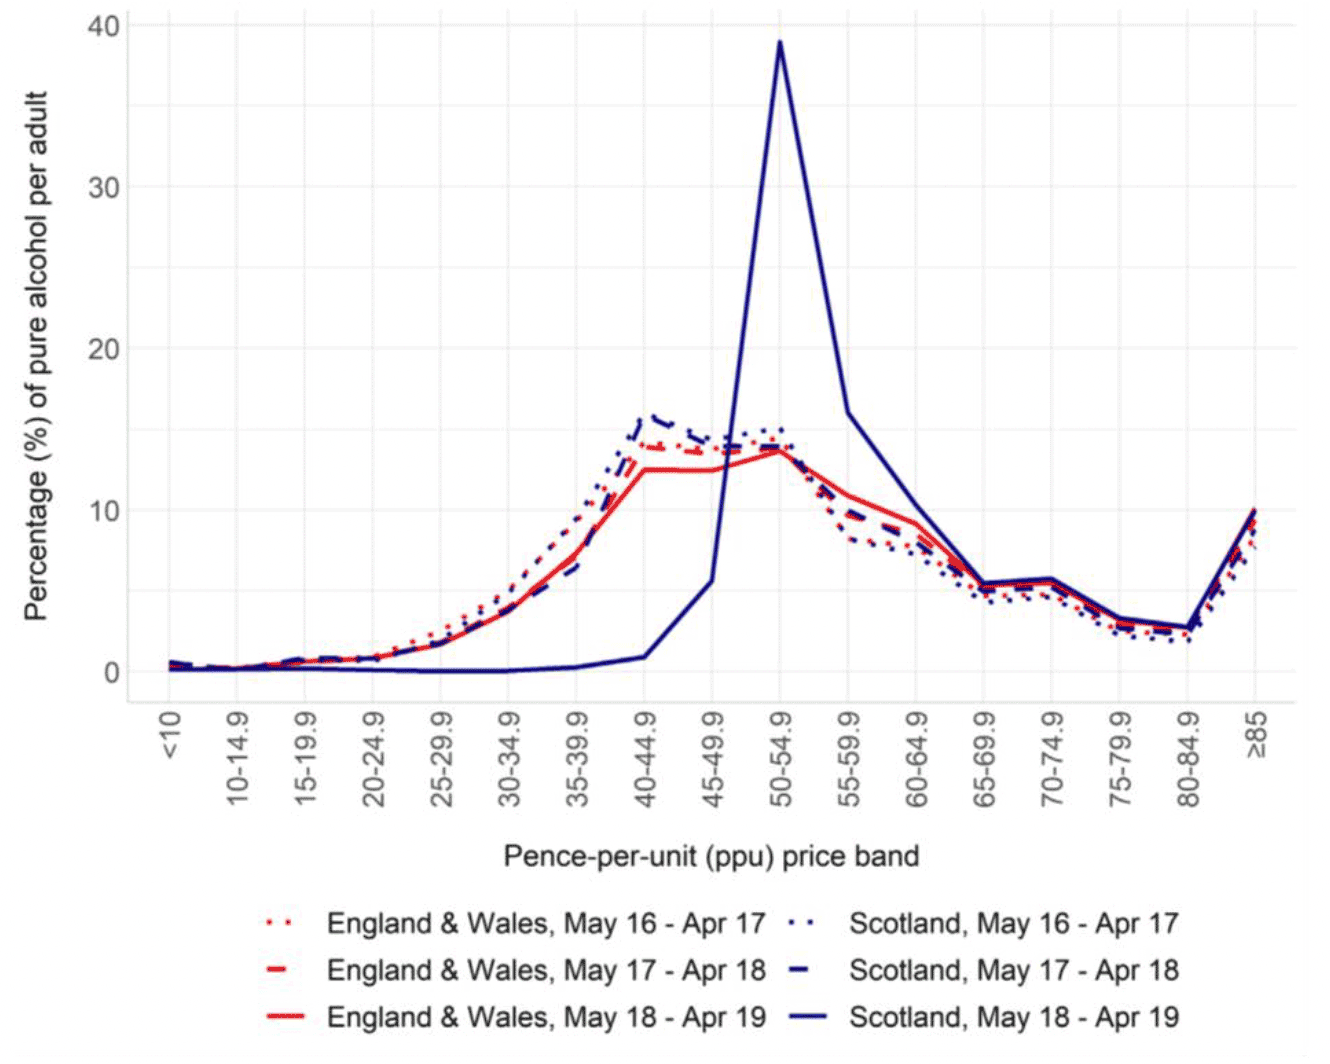 Shows the price distribution of alcohol sales (by volume) below 5 pence price bands in Scotland and England and Wales around the time that MUP was introduced in Scotland. It shows how the price distribution in Scotland changed with products which had previously sold for below 50ppu now bunching up just above the 50ppu price point in general. 